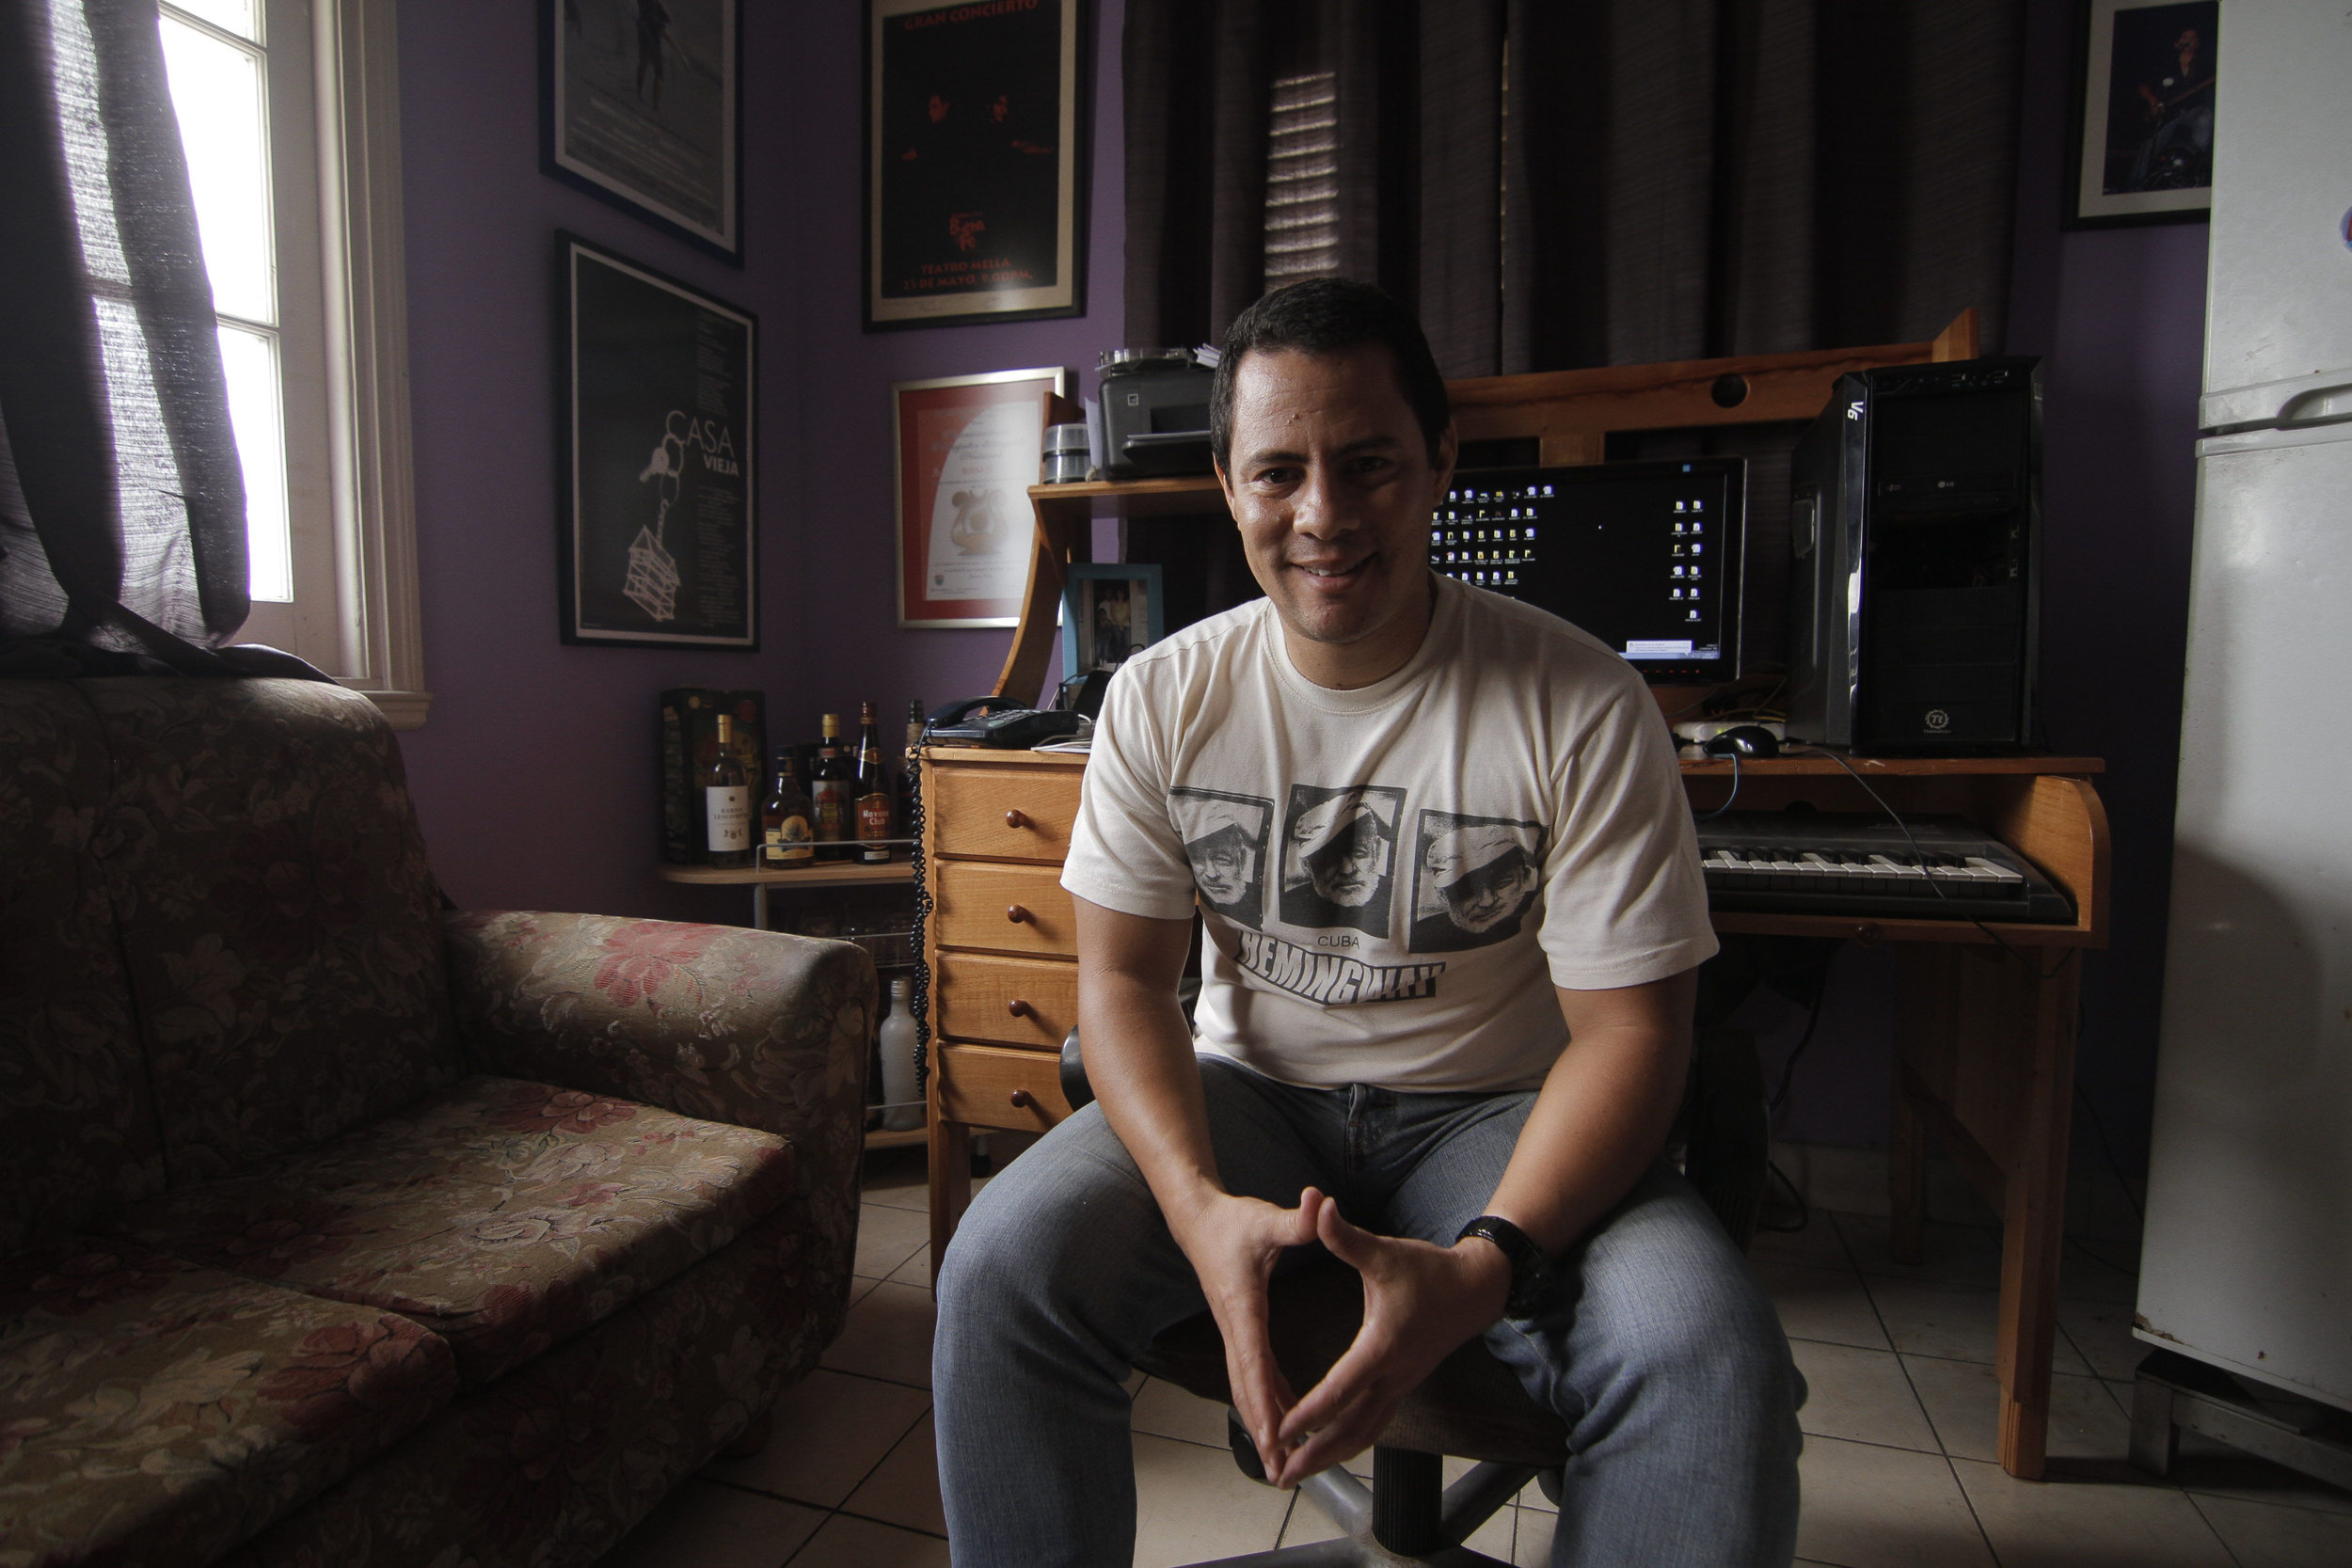  CUBA- Famous Cuban singer, Israel Rojas, talked to us about how the new relations between Cuba and the United States could help expand the music industry in Cuba.

El famoso cantante cubano, Israel Rojas, nos habló de cómo las nuevas relaciones entr